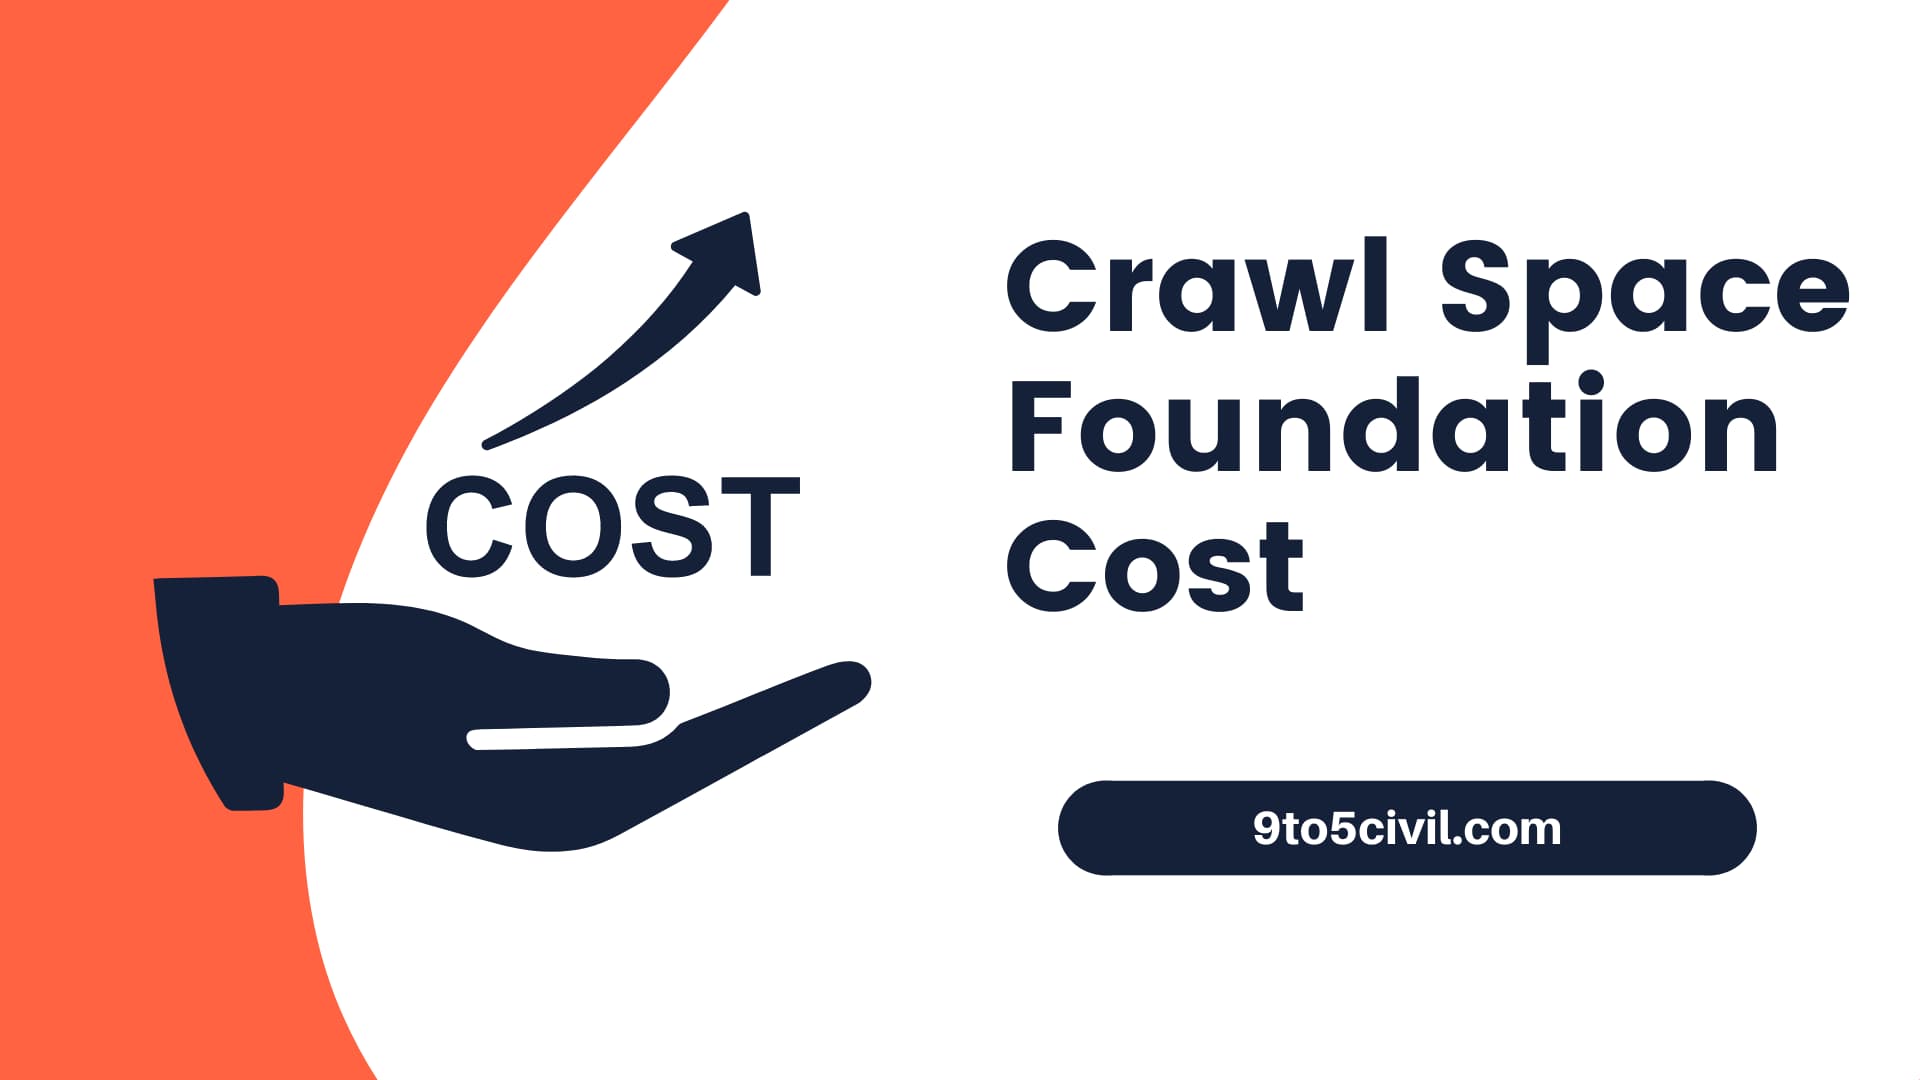 Crawl Space Foundation Cost